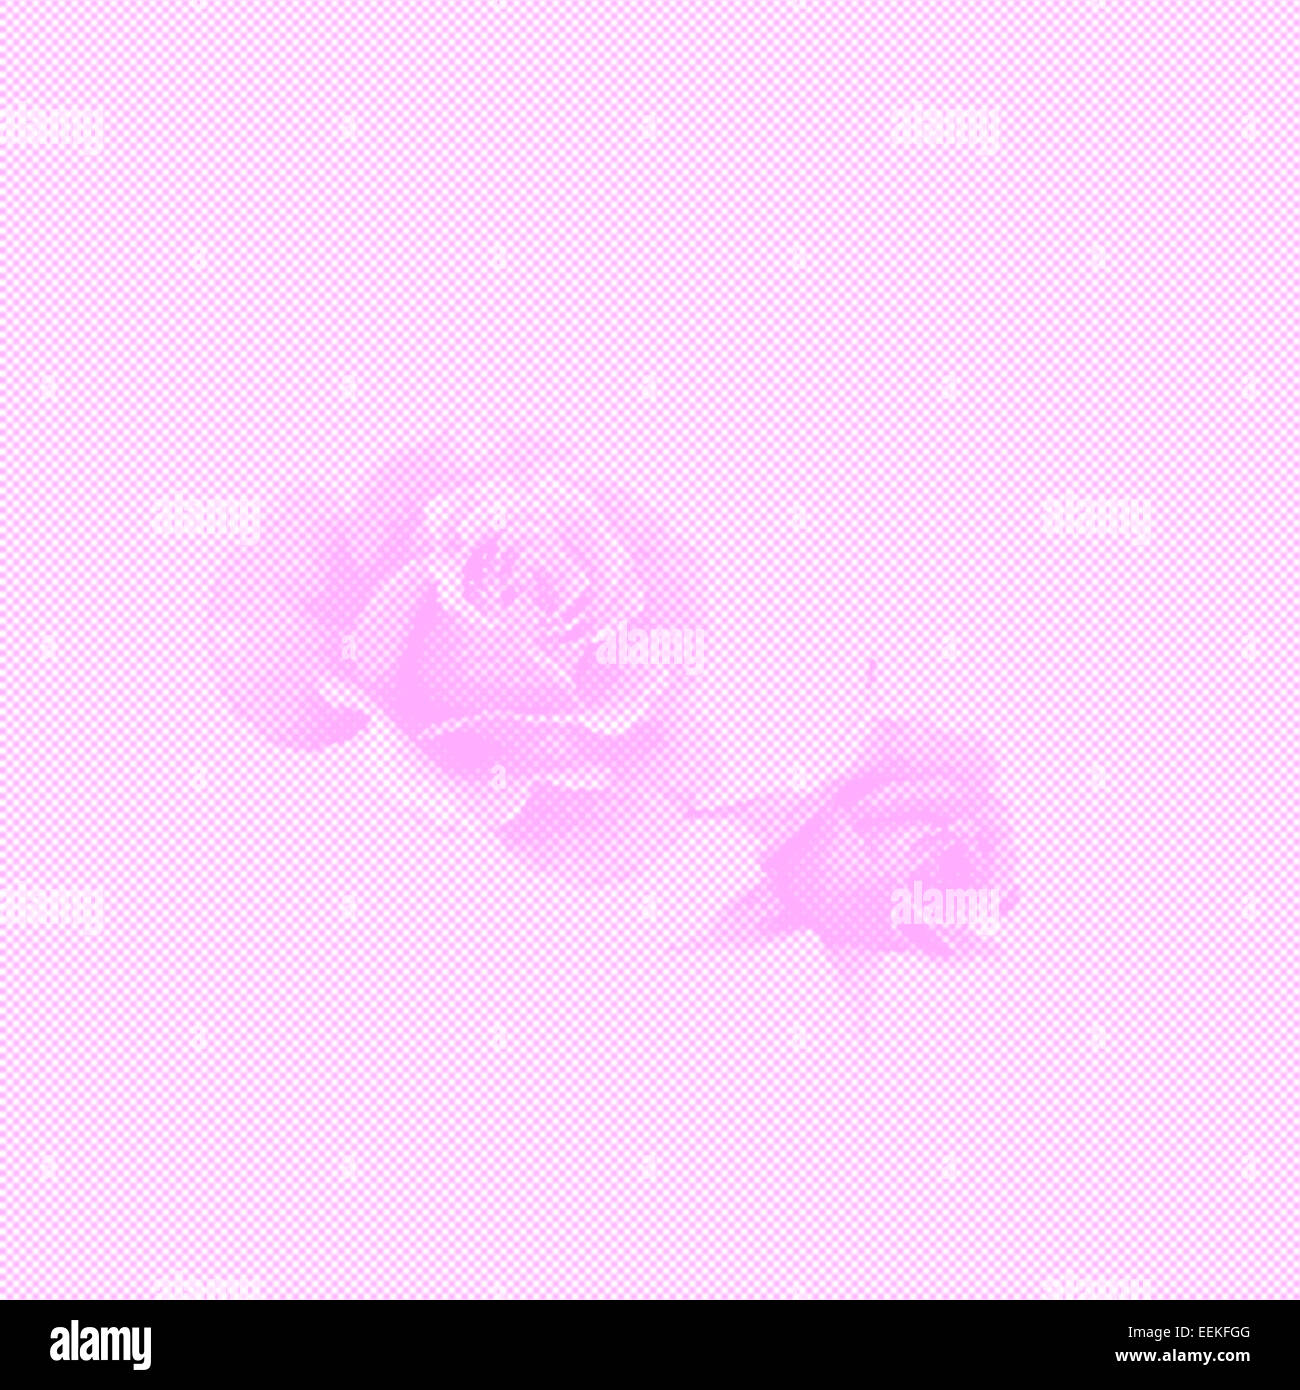 Delicate feminine background with roses shaped from dots on a dotted background Stock Photo